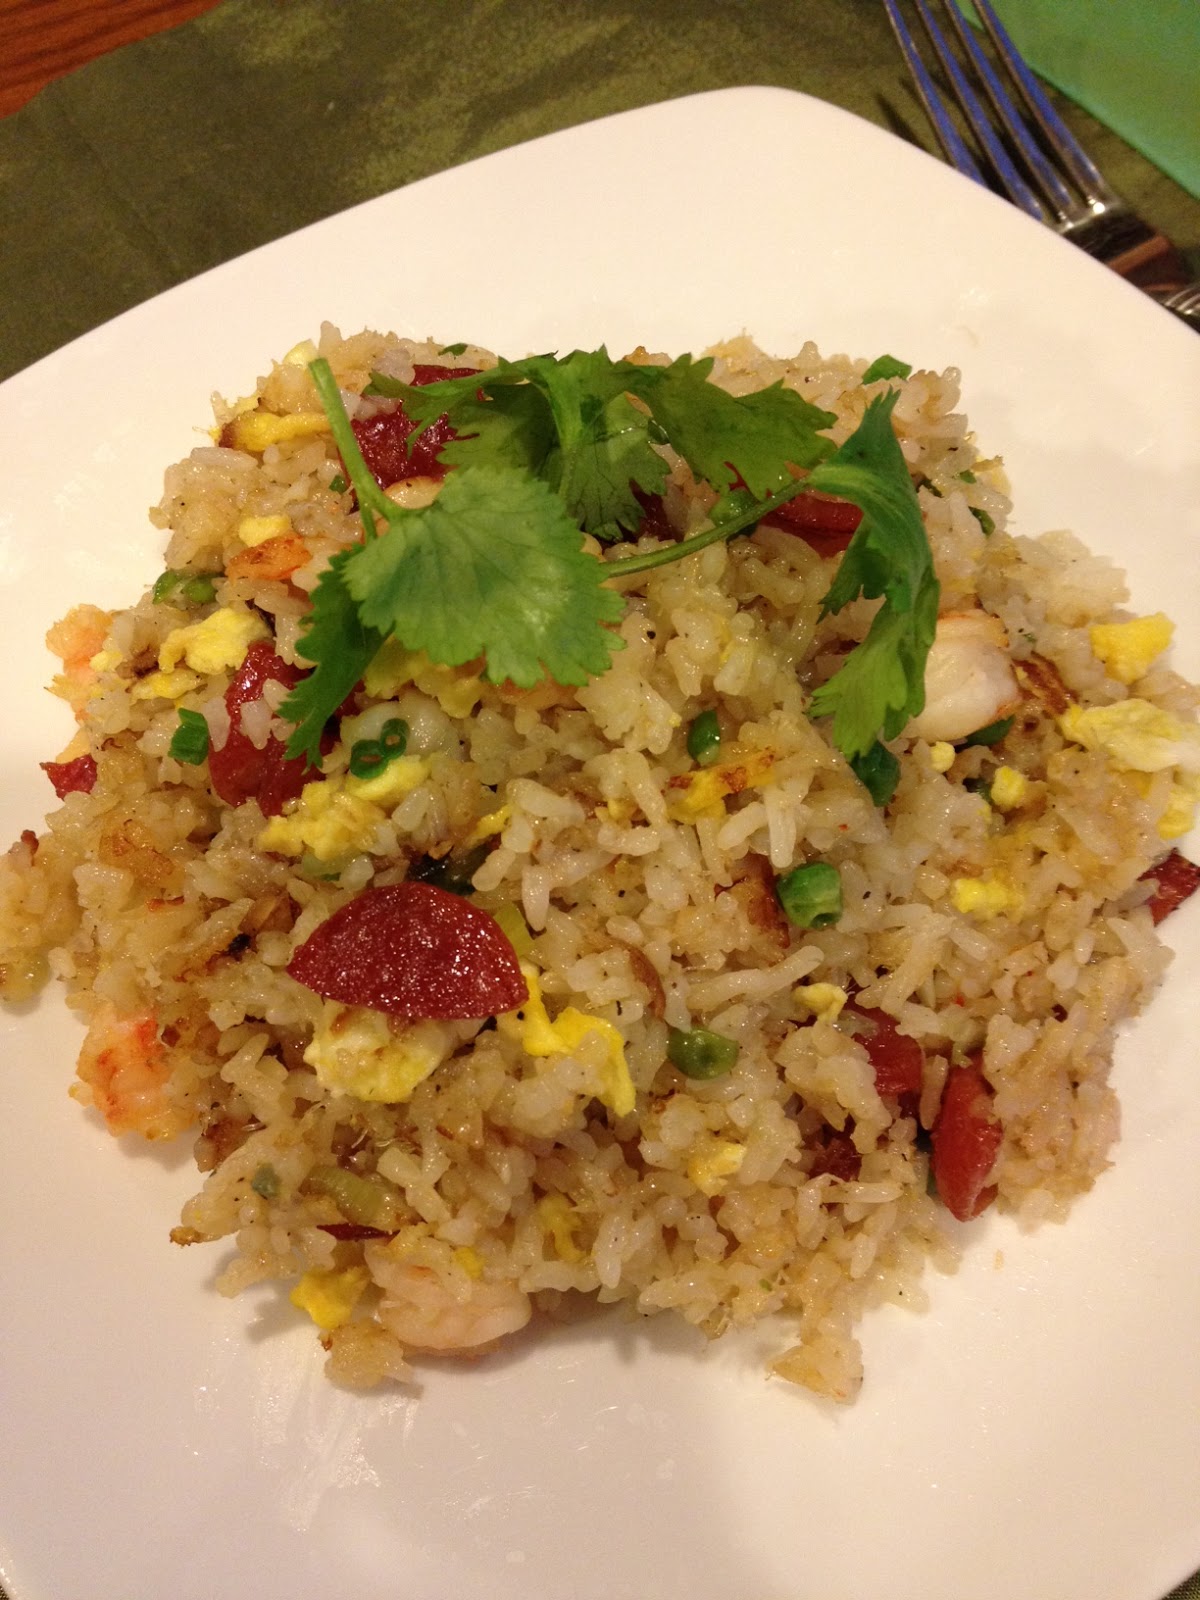 Gourmet by Kat: Seafood Fried Rice